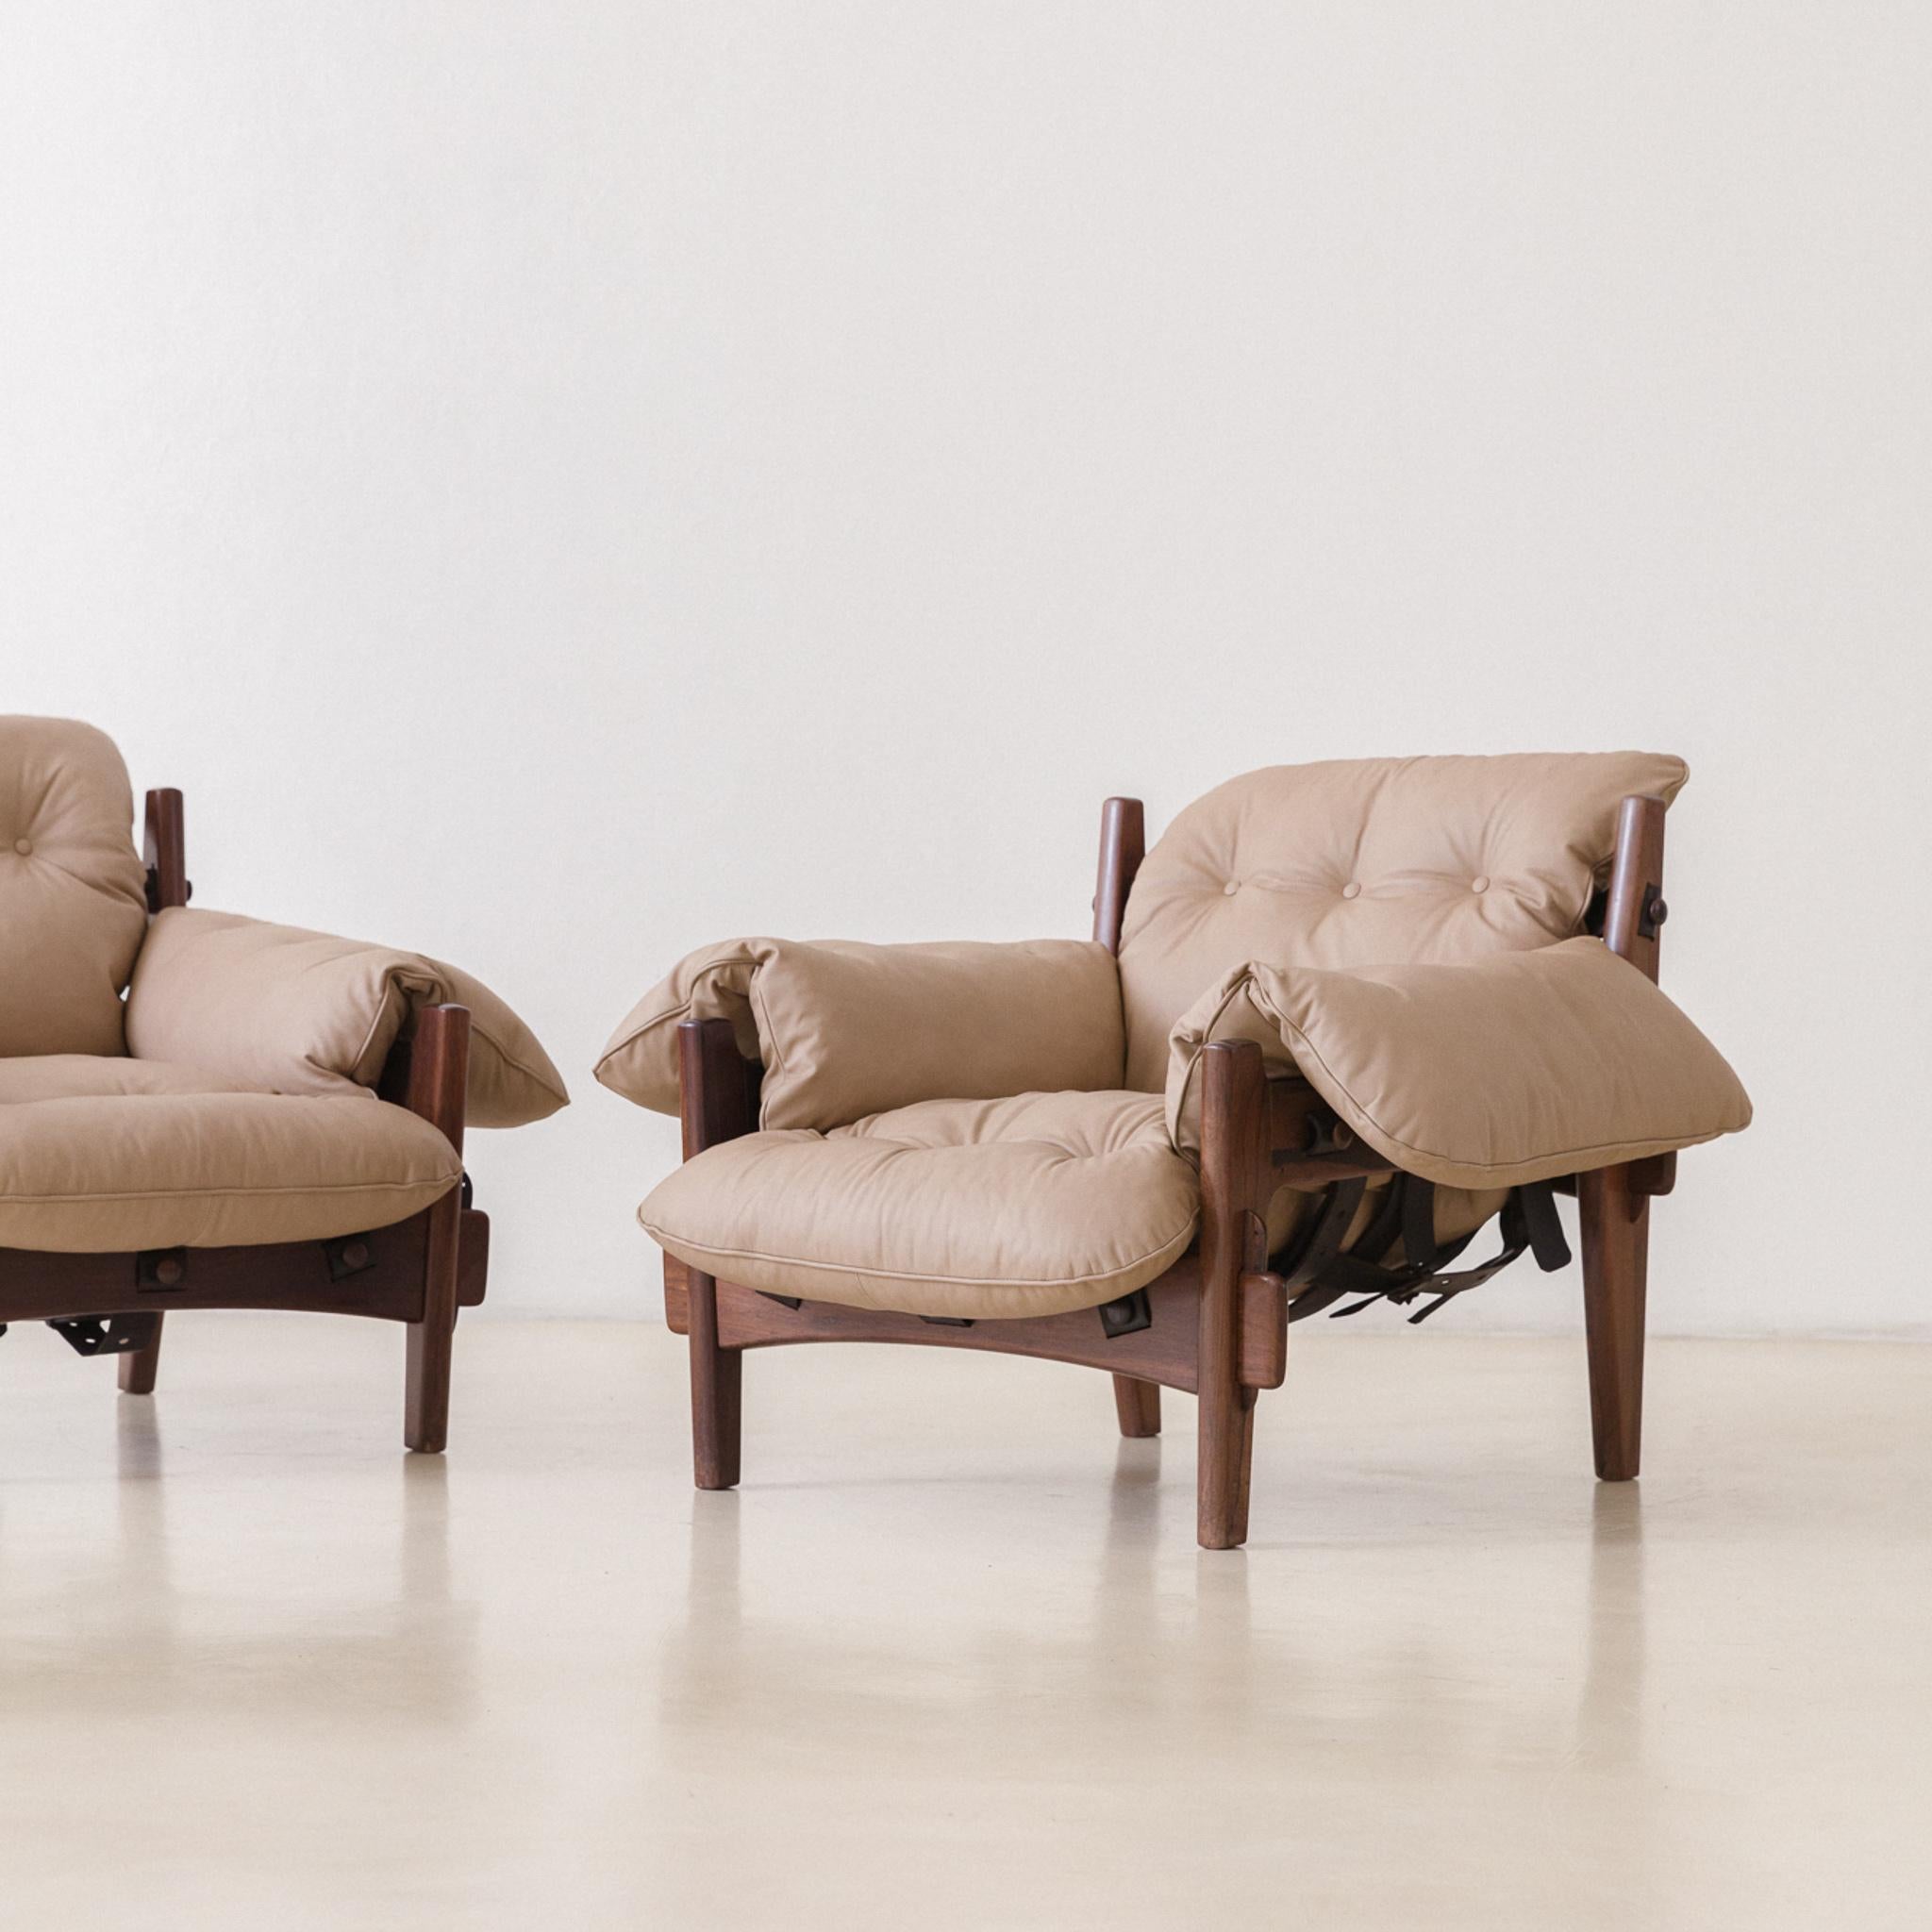 Vintage Pair of Moleca Rosewood Armchairs by Sergio Rodrigues, 1962, Brazil For Sale 1